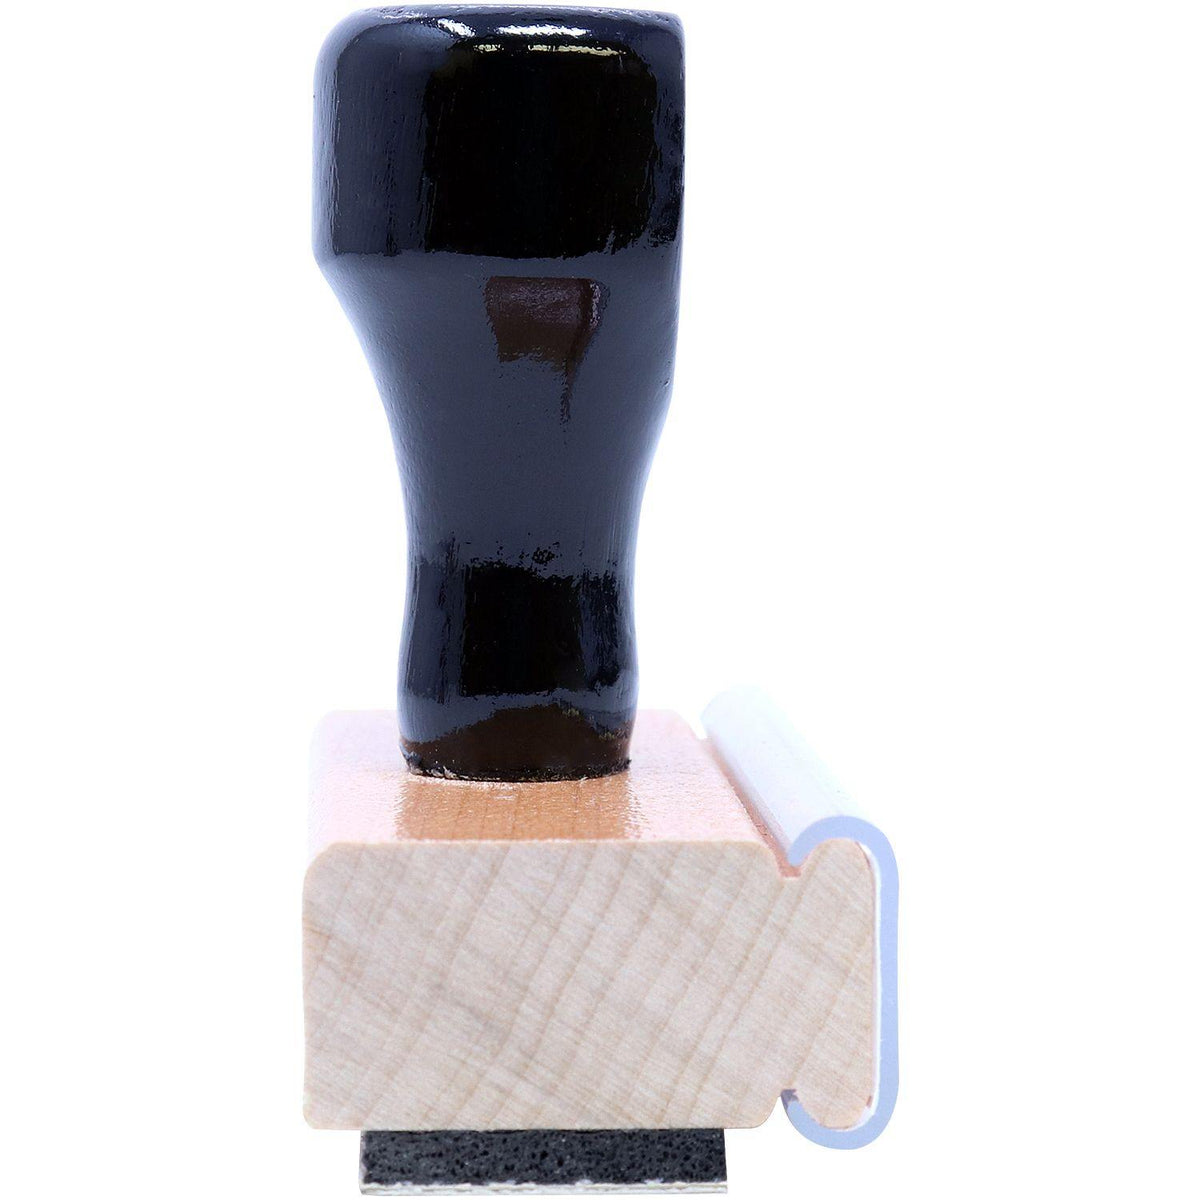 Side View of Large Amortizado Rubber Stamp